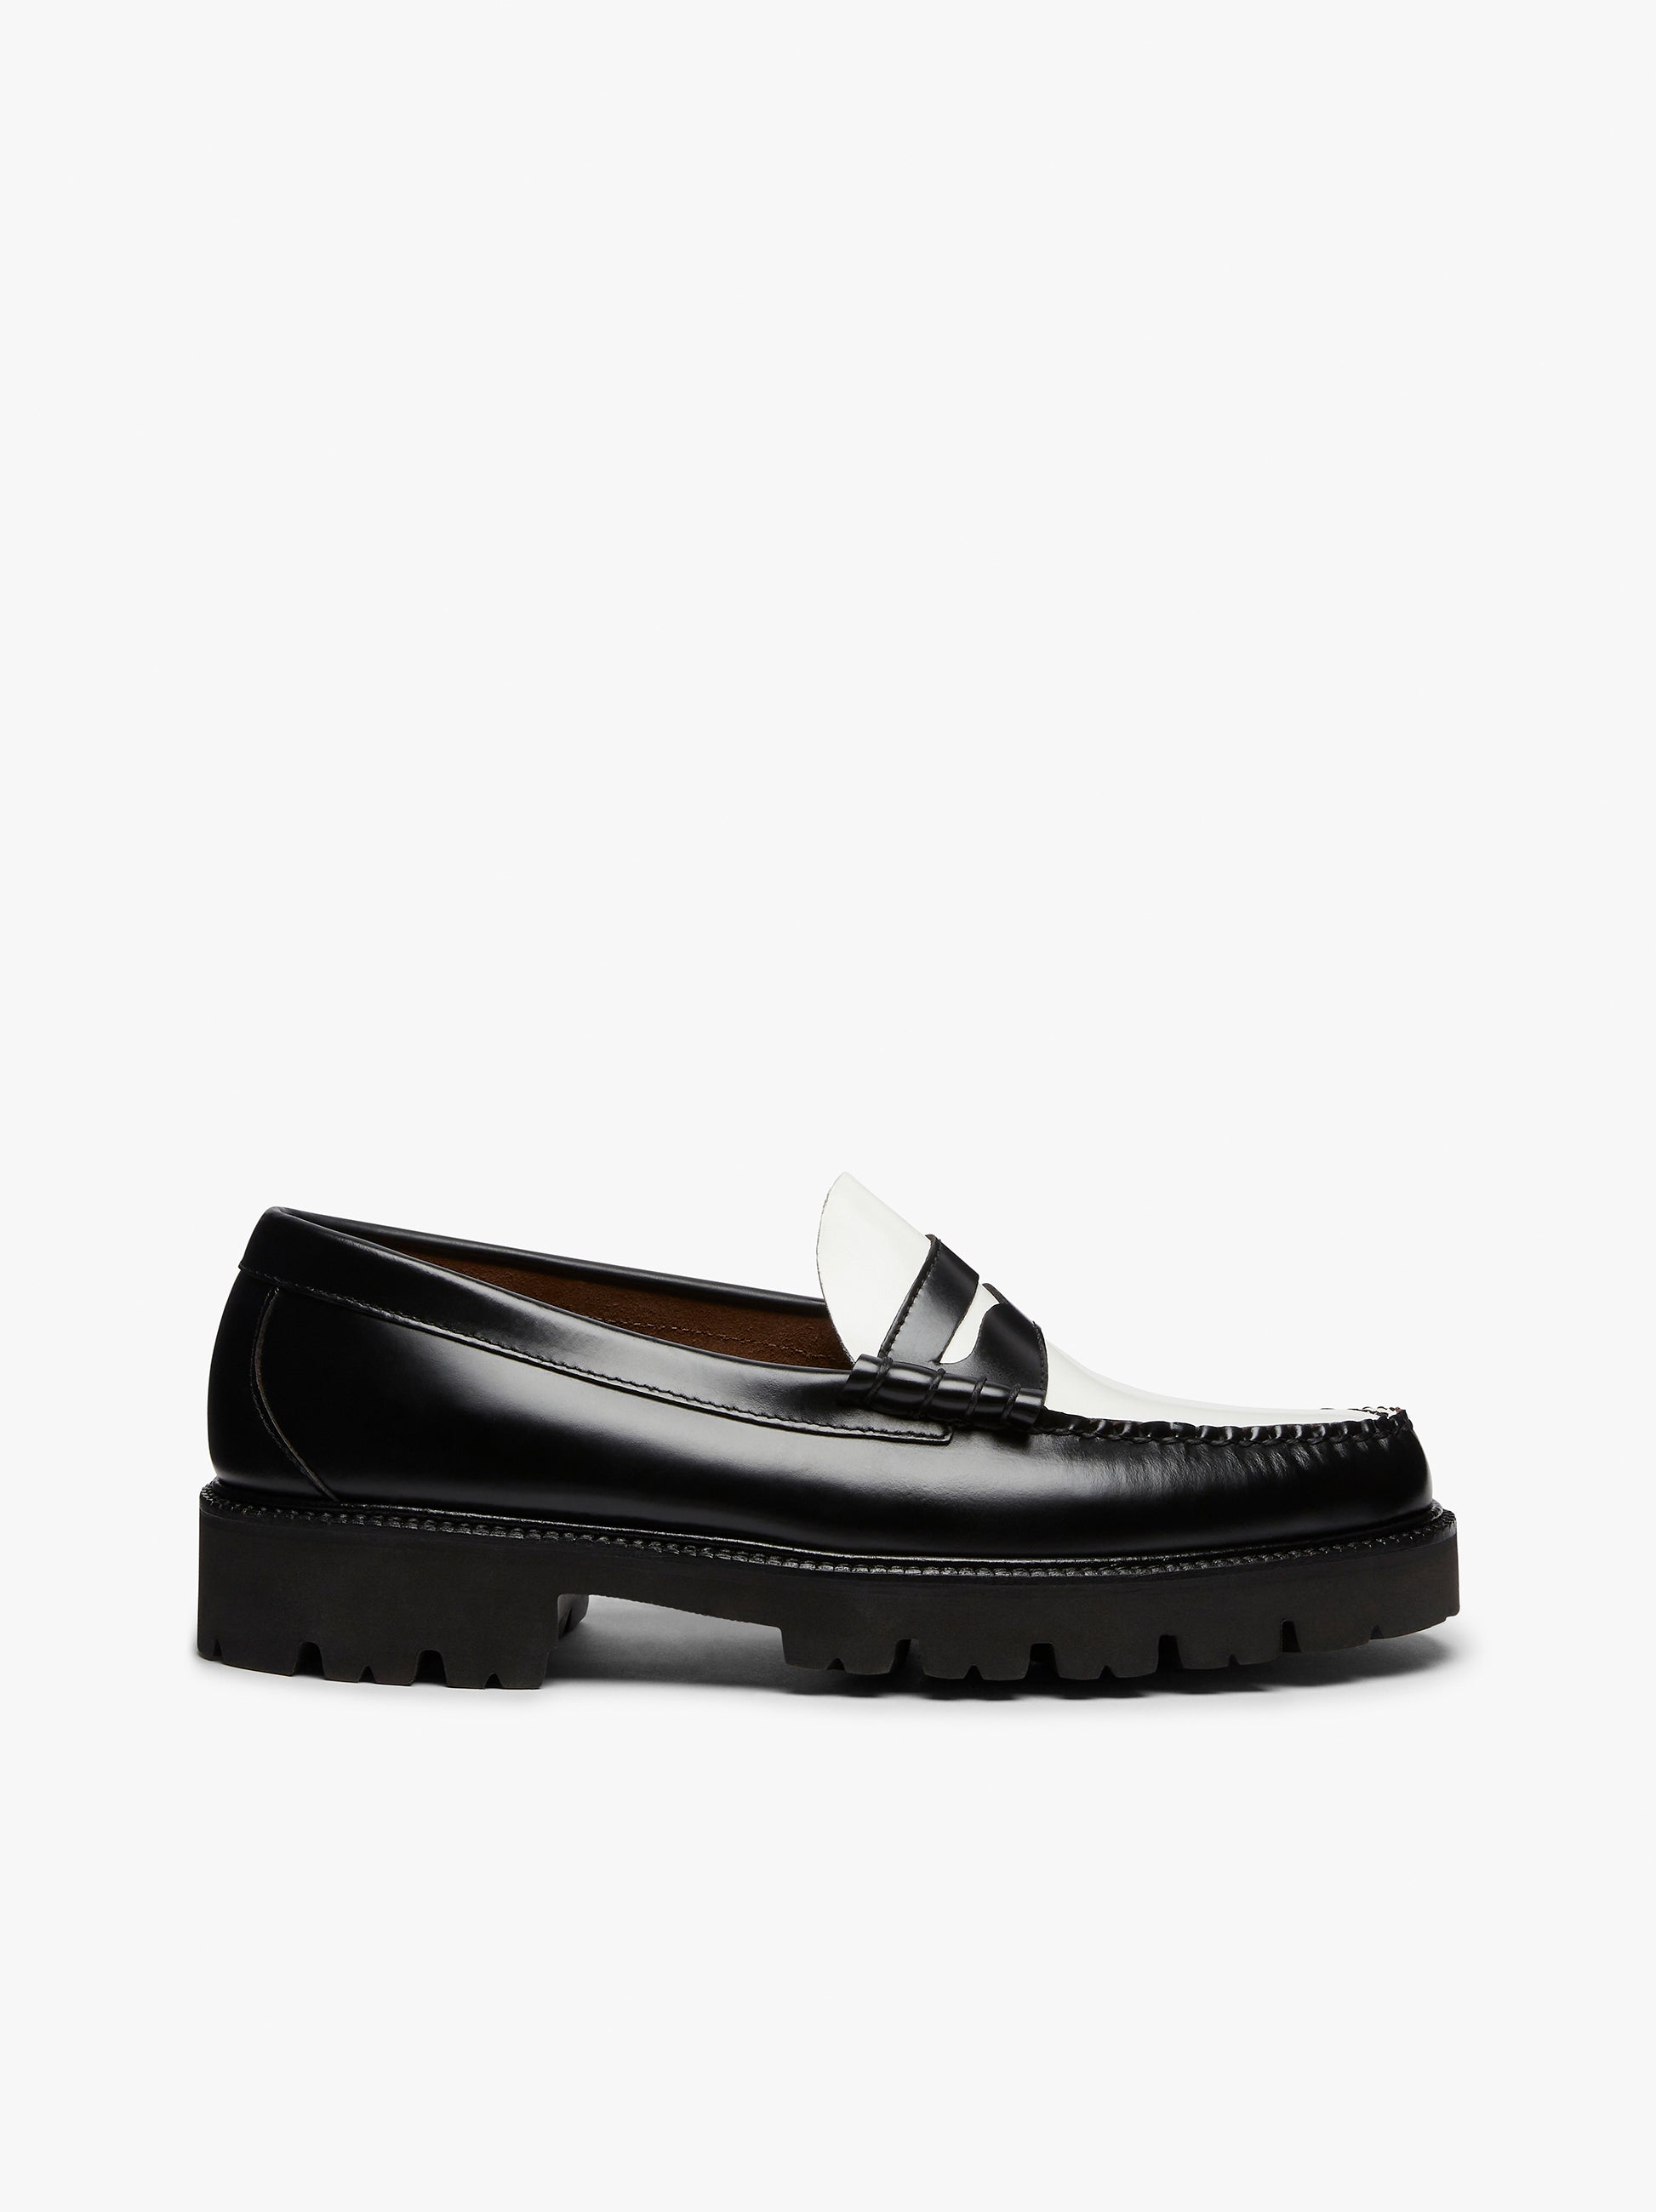 □Condition新品未使用UK7 G.H.BASS Weejuns BLACK WHITE LOAFER